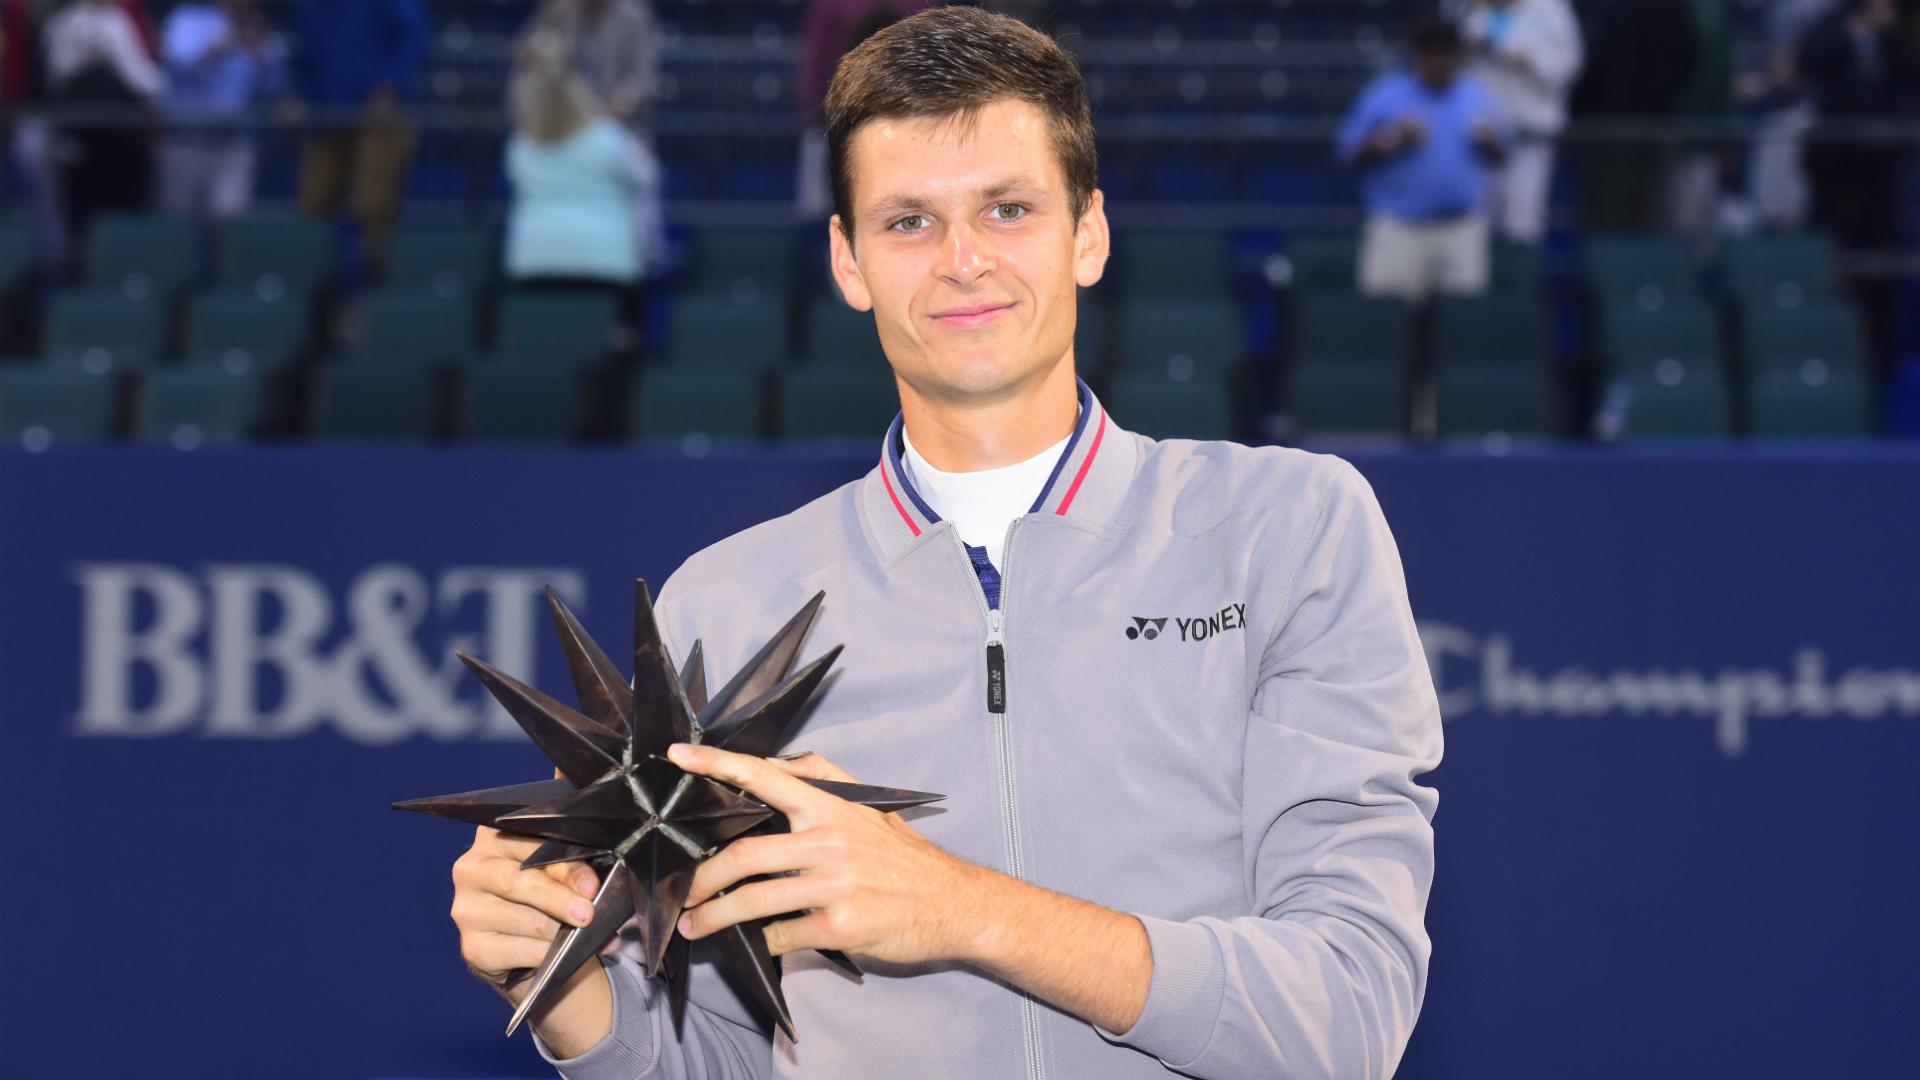 Hubert Hurkacz made Polish history as the third seed stunned Benoit Paire 6-3 3-6 6-3 at the ATP 250 tournament in North Carolina.